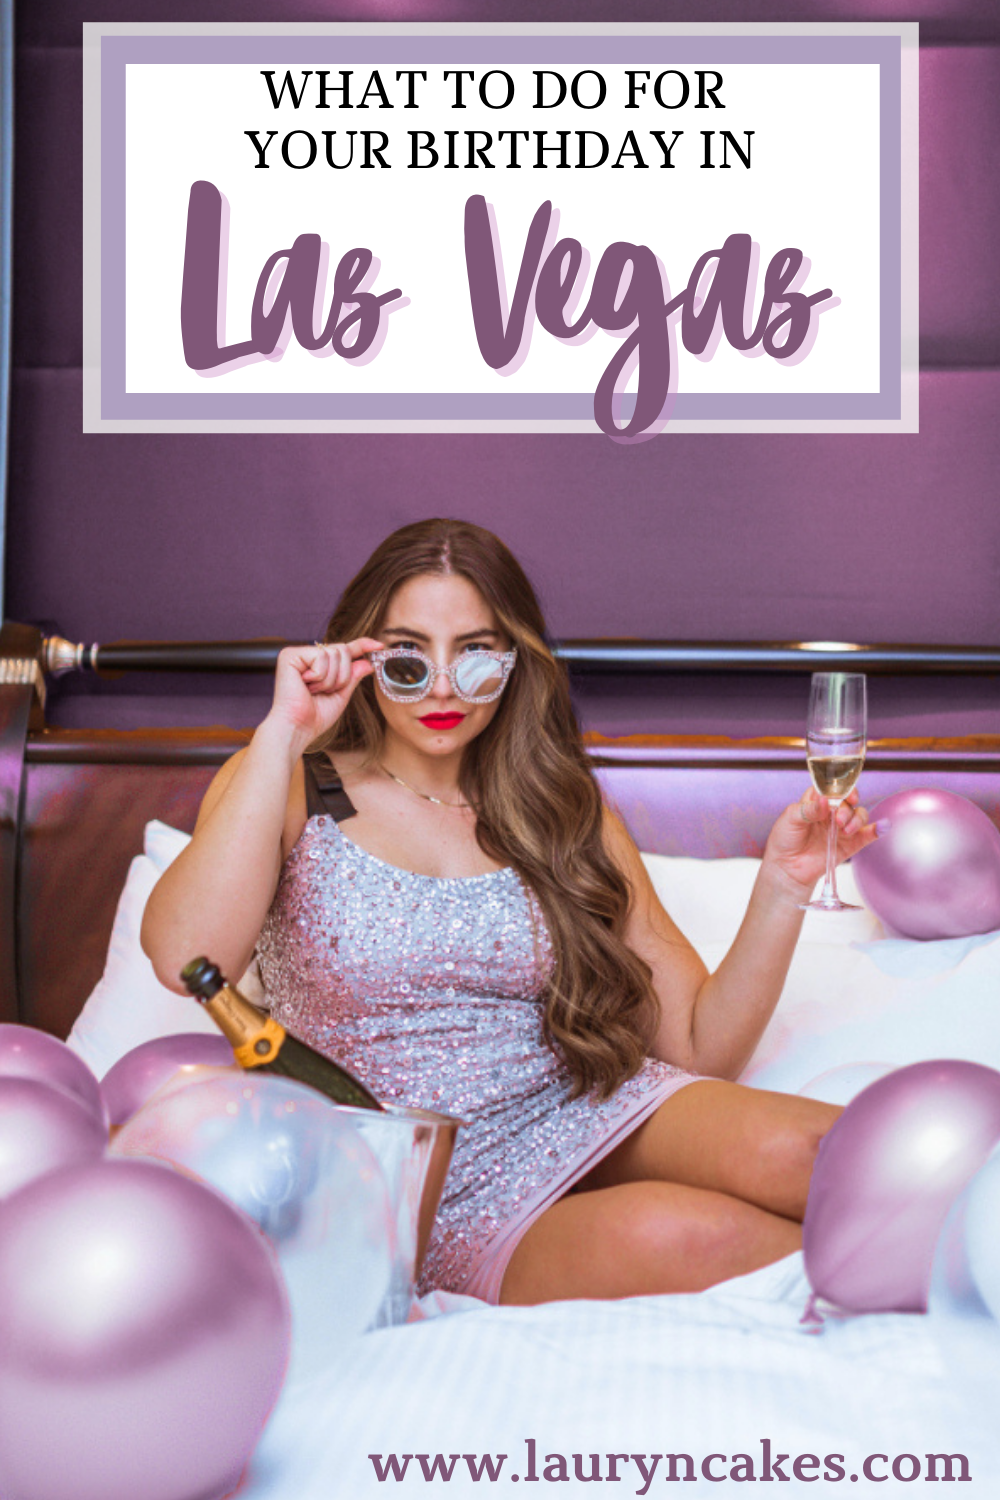 Lauryn Hock sitting on a bed holding a glass of champagne with balloons surrounding her. She's wearing a sparkly cocktail dress and peers over her sequin sunglasses while holding a glass. Text over the image says, "what to do for your birthday in vegas"